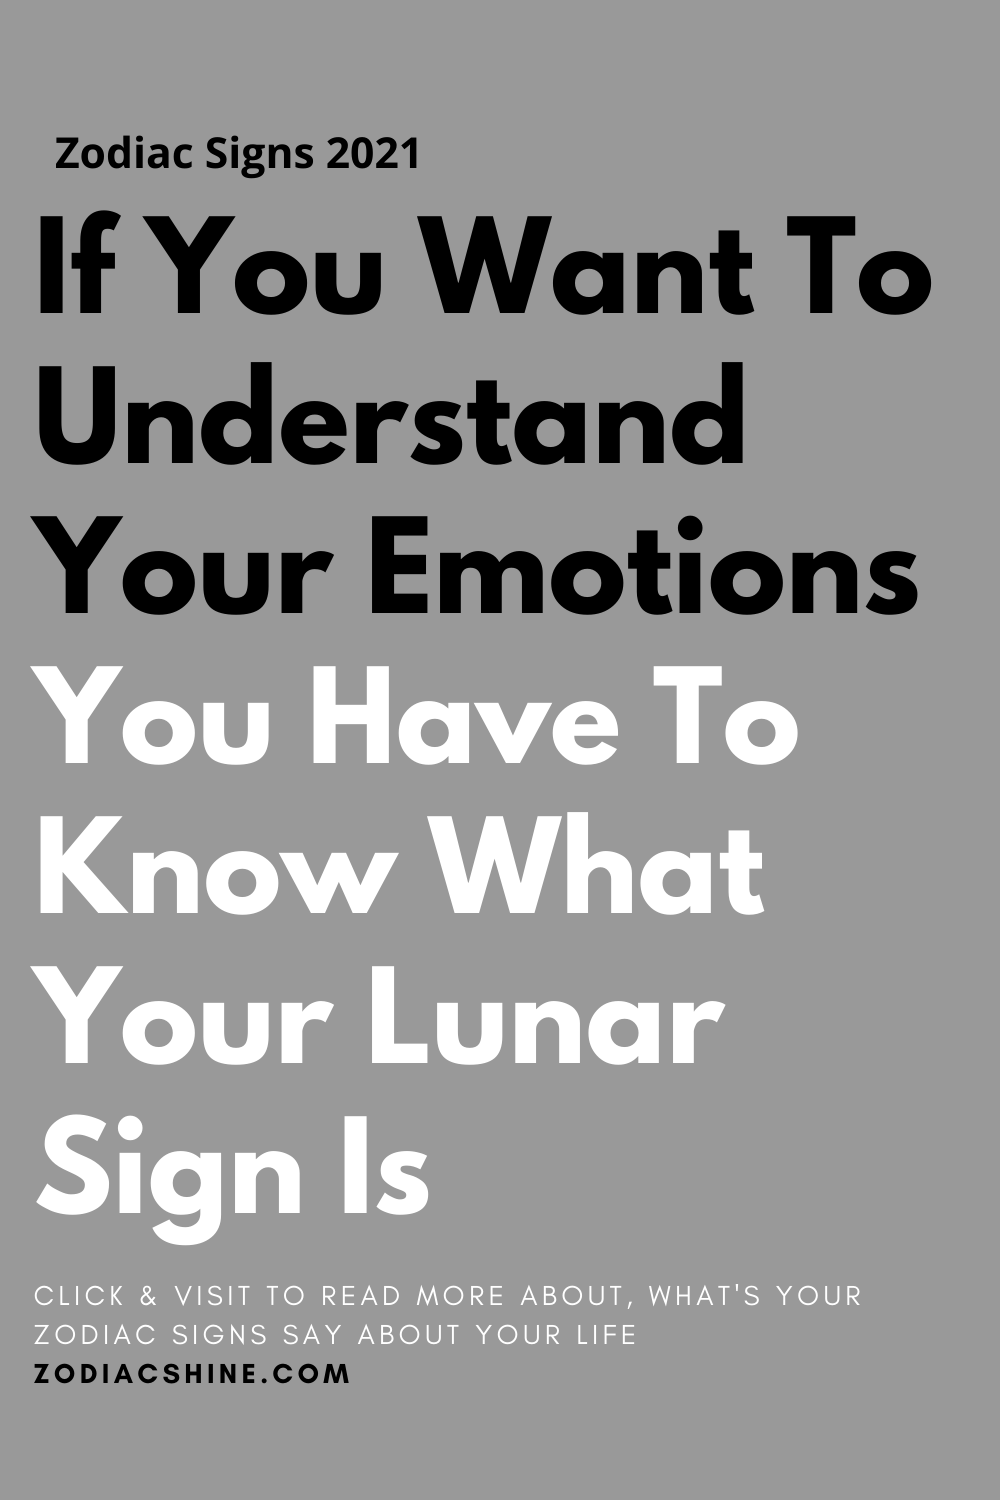 If You Want To Understand Your Emotions You Have To Know What Your Lunar Sign Is